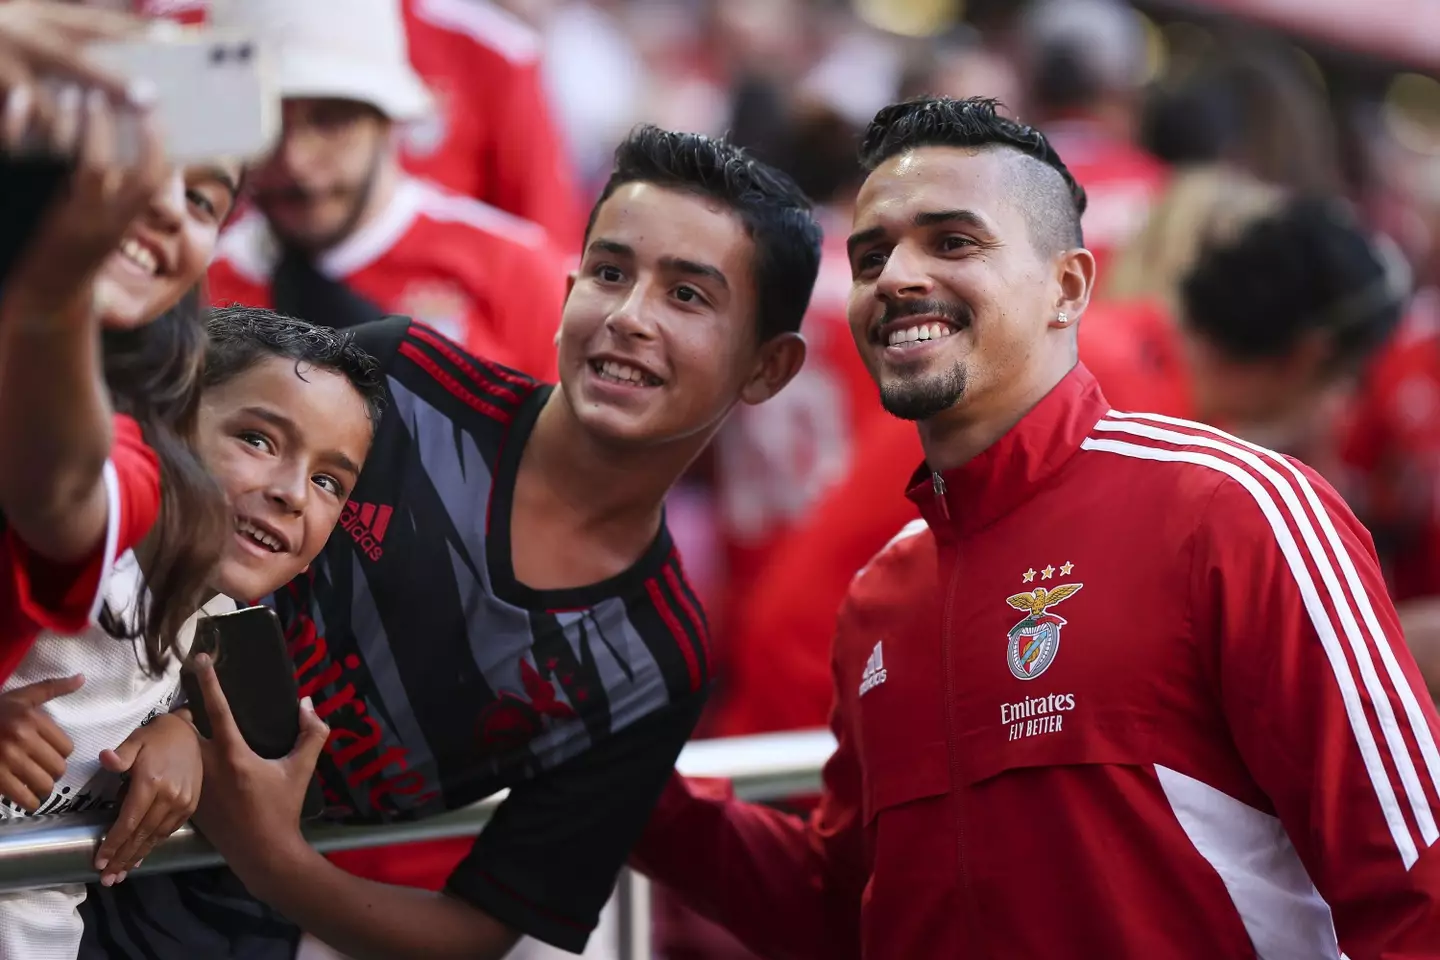 Verissimo (right) joined Benfica from Santos in 2021 (Image: Alamy)